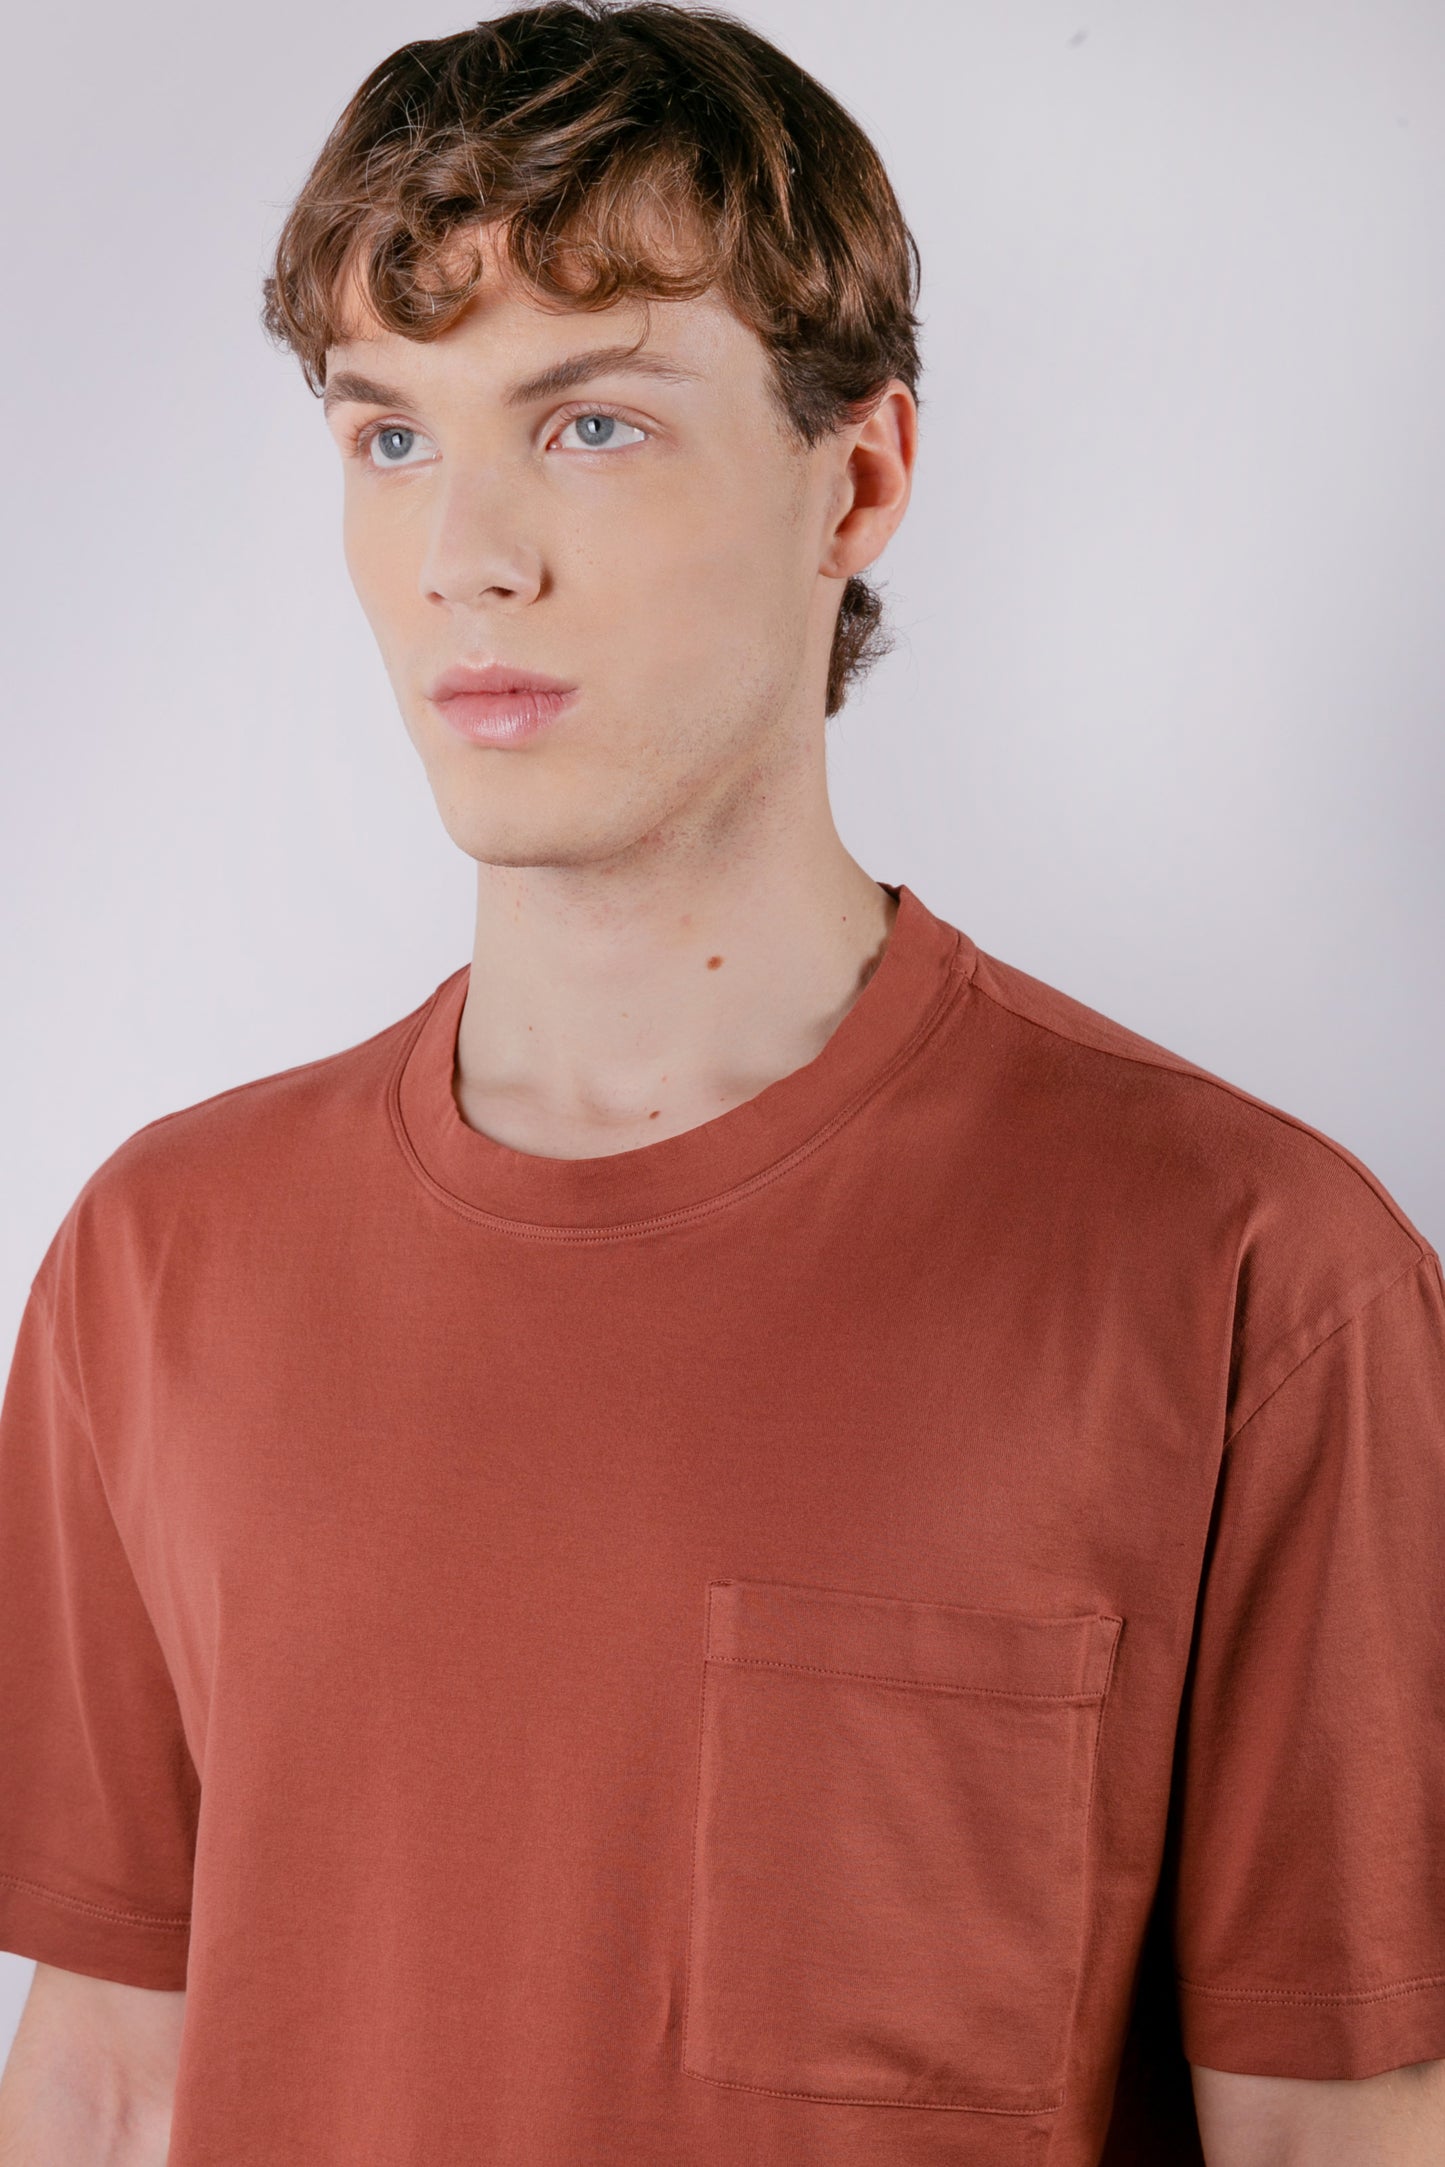 T-shirt with brick-colored pocket